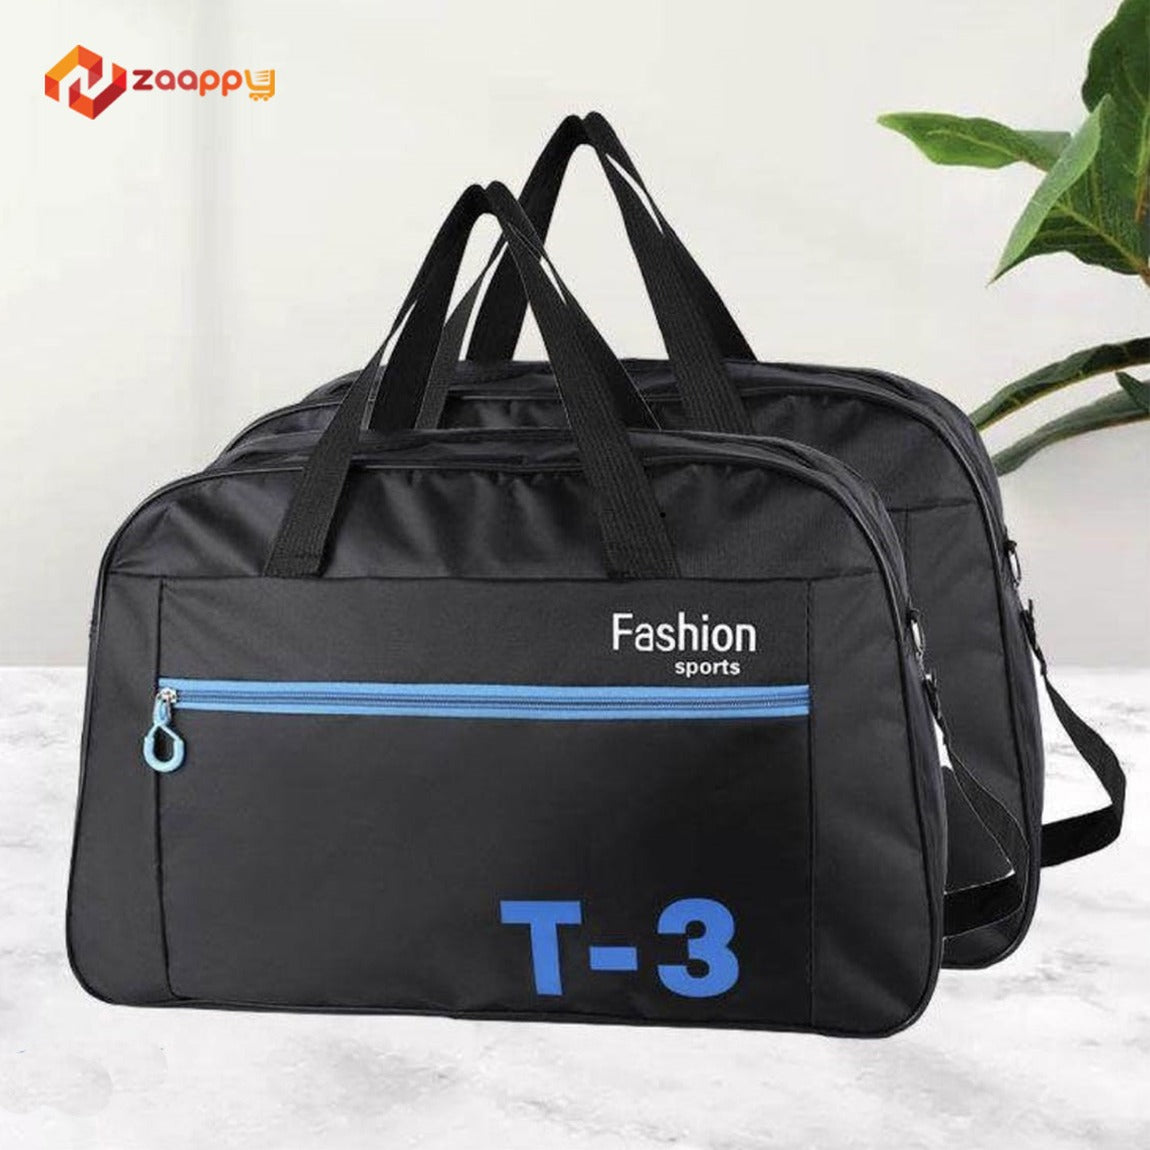 32" VL PU Leather Lightweight Soft Material Luggage Bag | Get T-3 Sports Bag For Men Combo Gift Zaappy